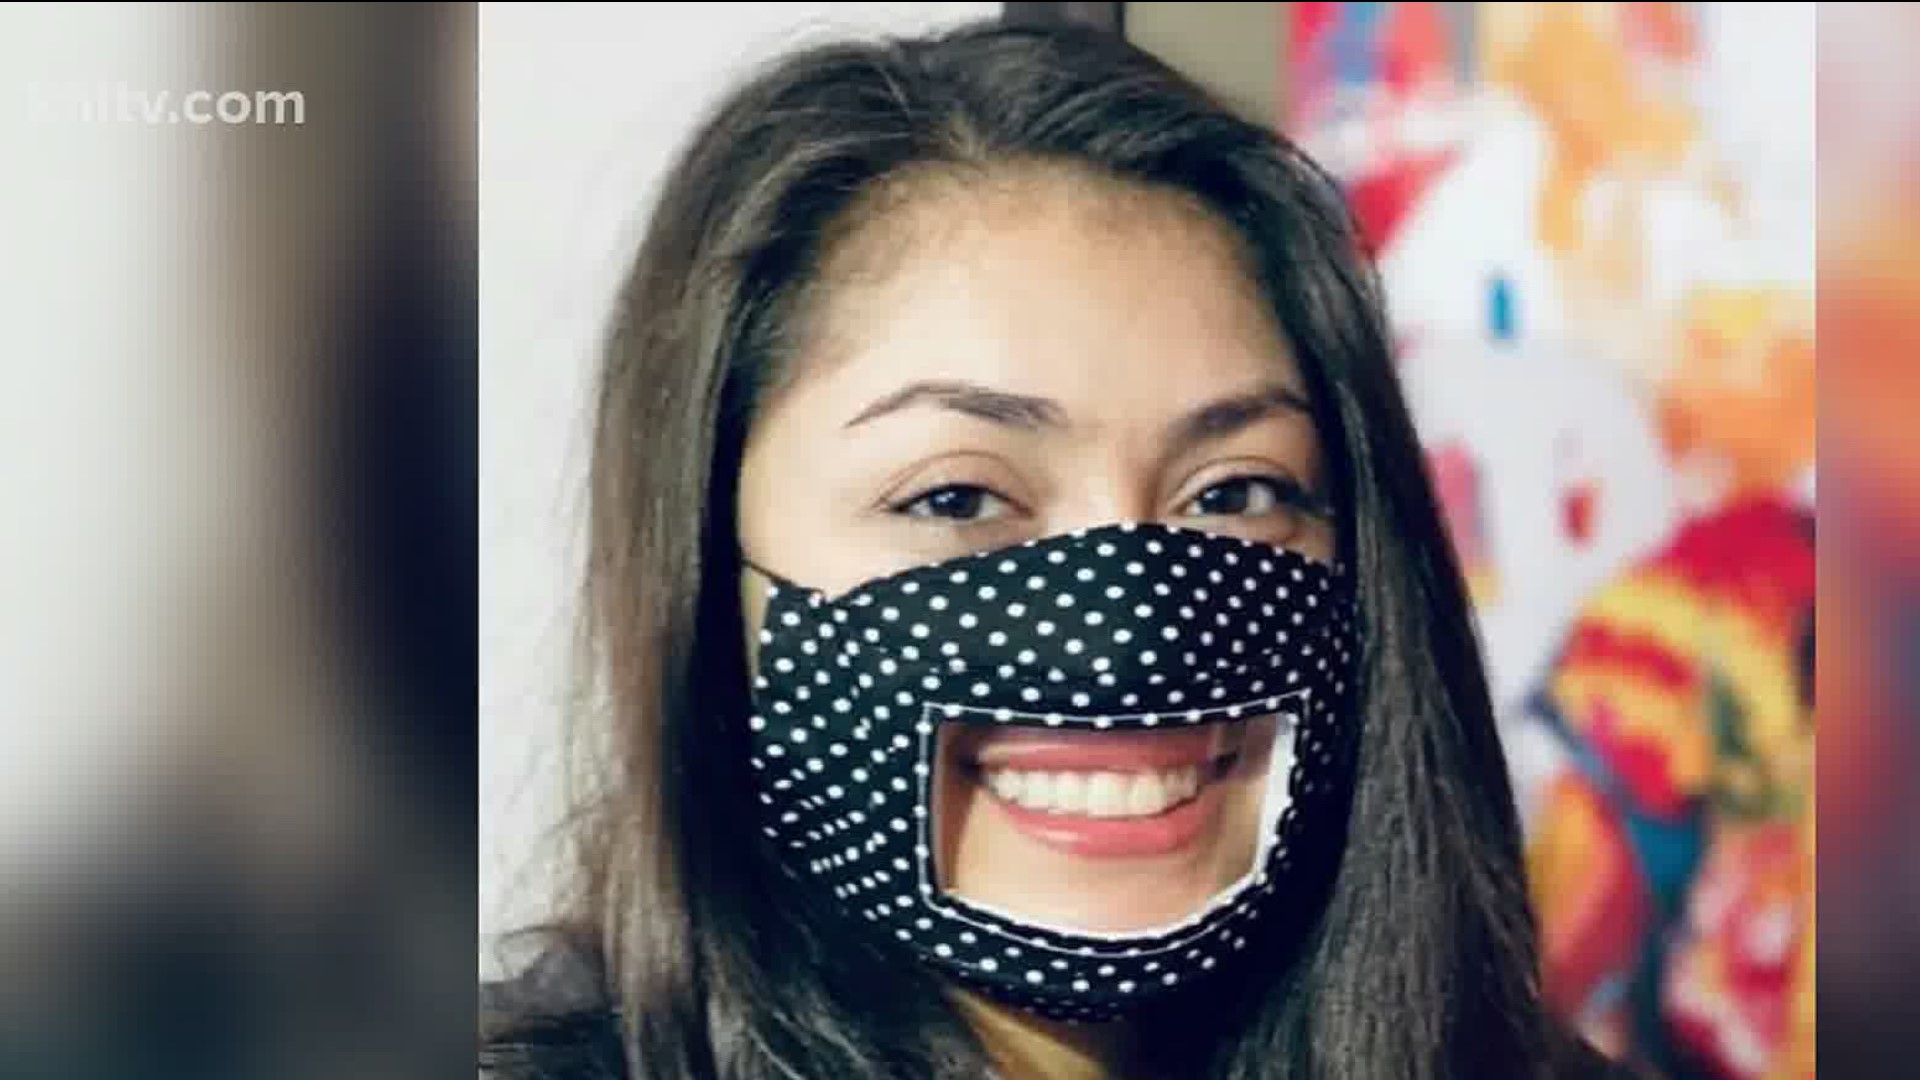 New masks are helping people that need to read lips to communicate.